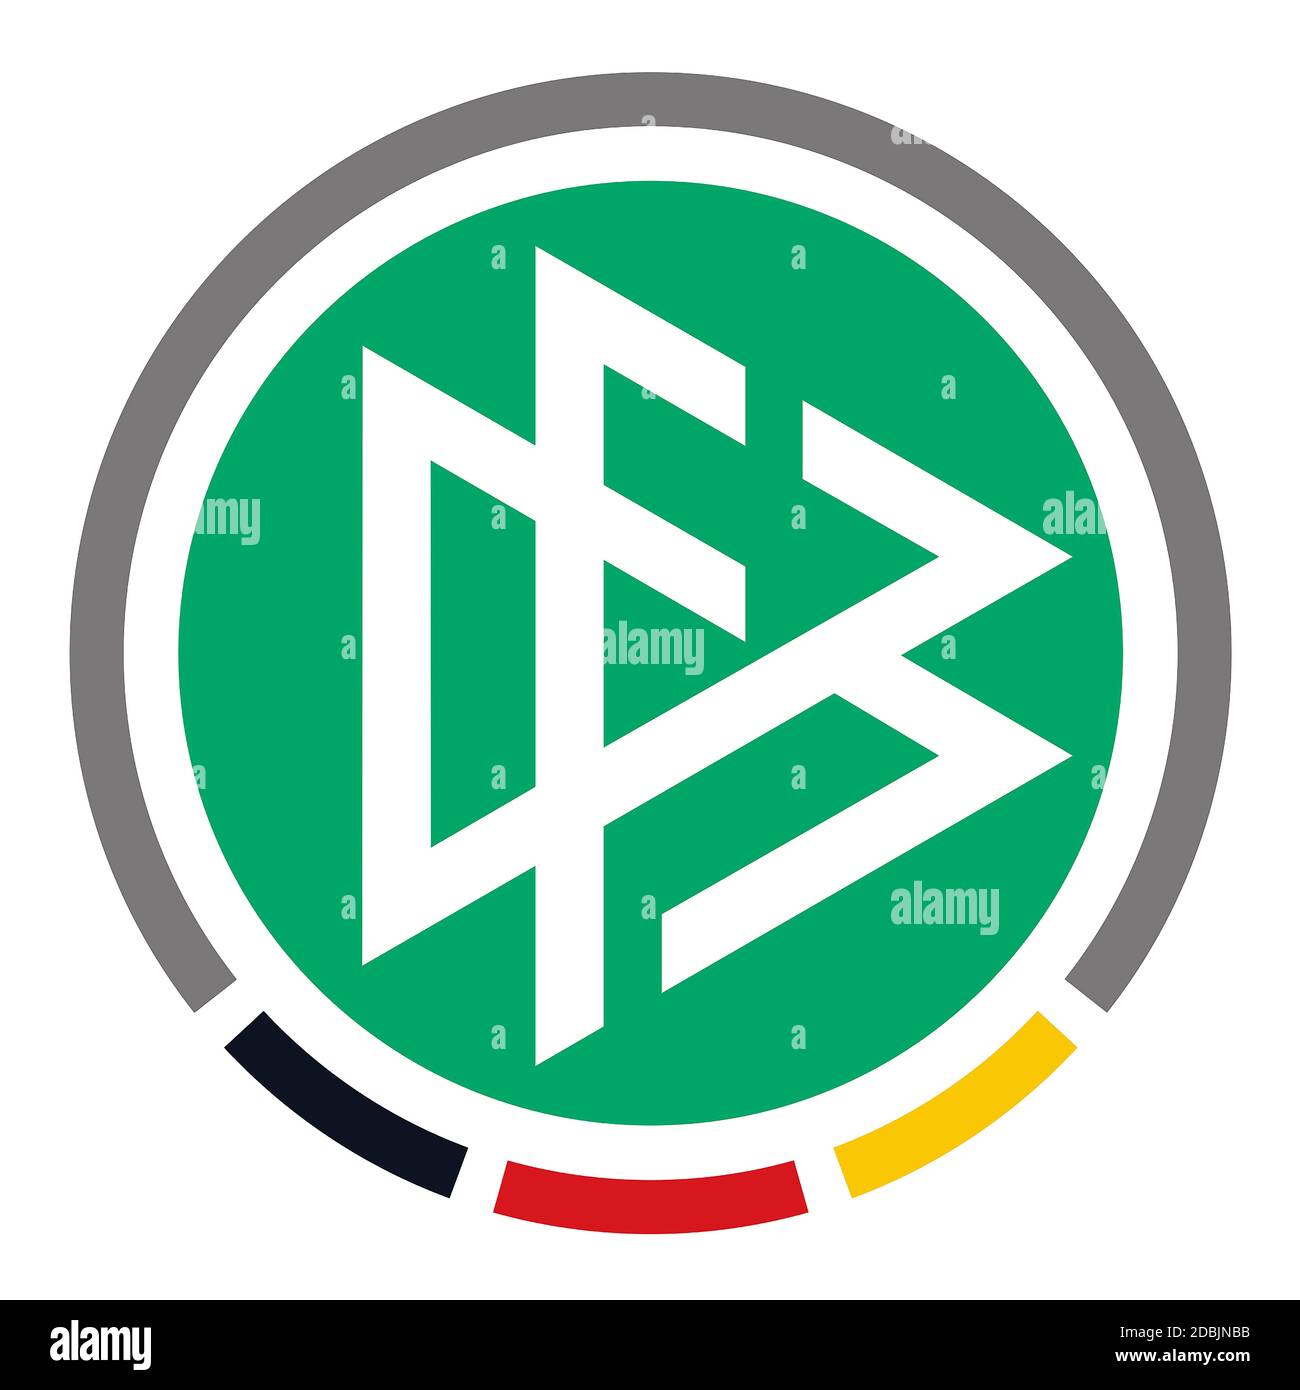 Logo of the German Football Association DFB and the German national team - Germany. Stock Photo